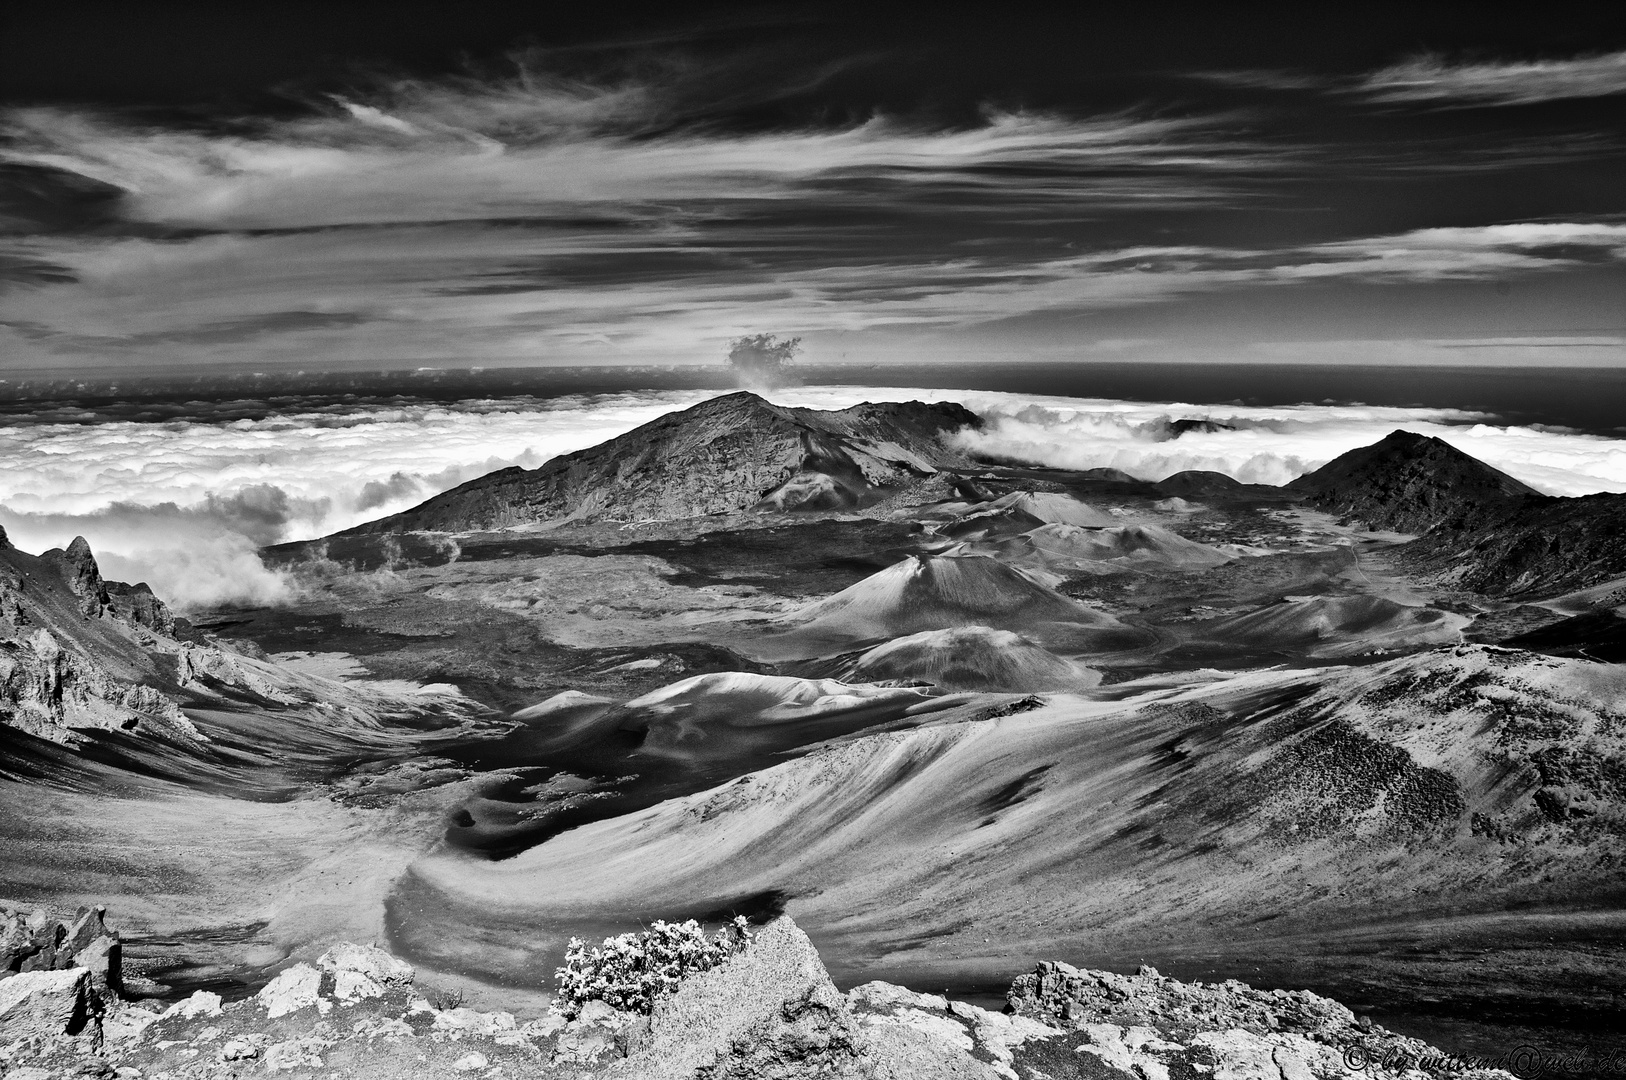 View from the top of the Haleakala Crater